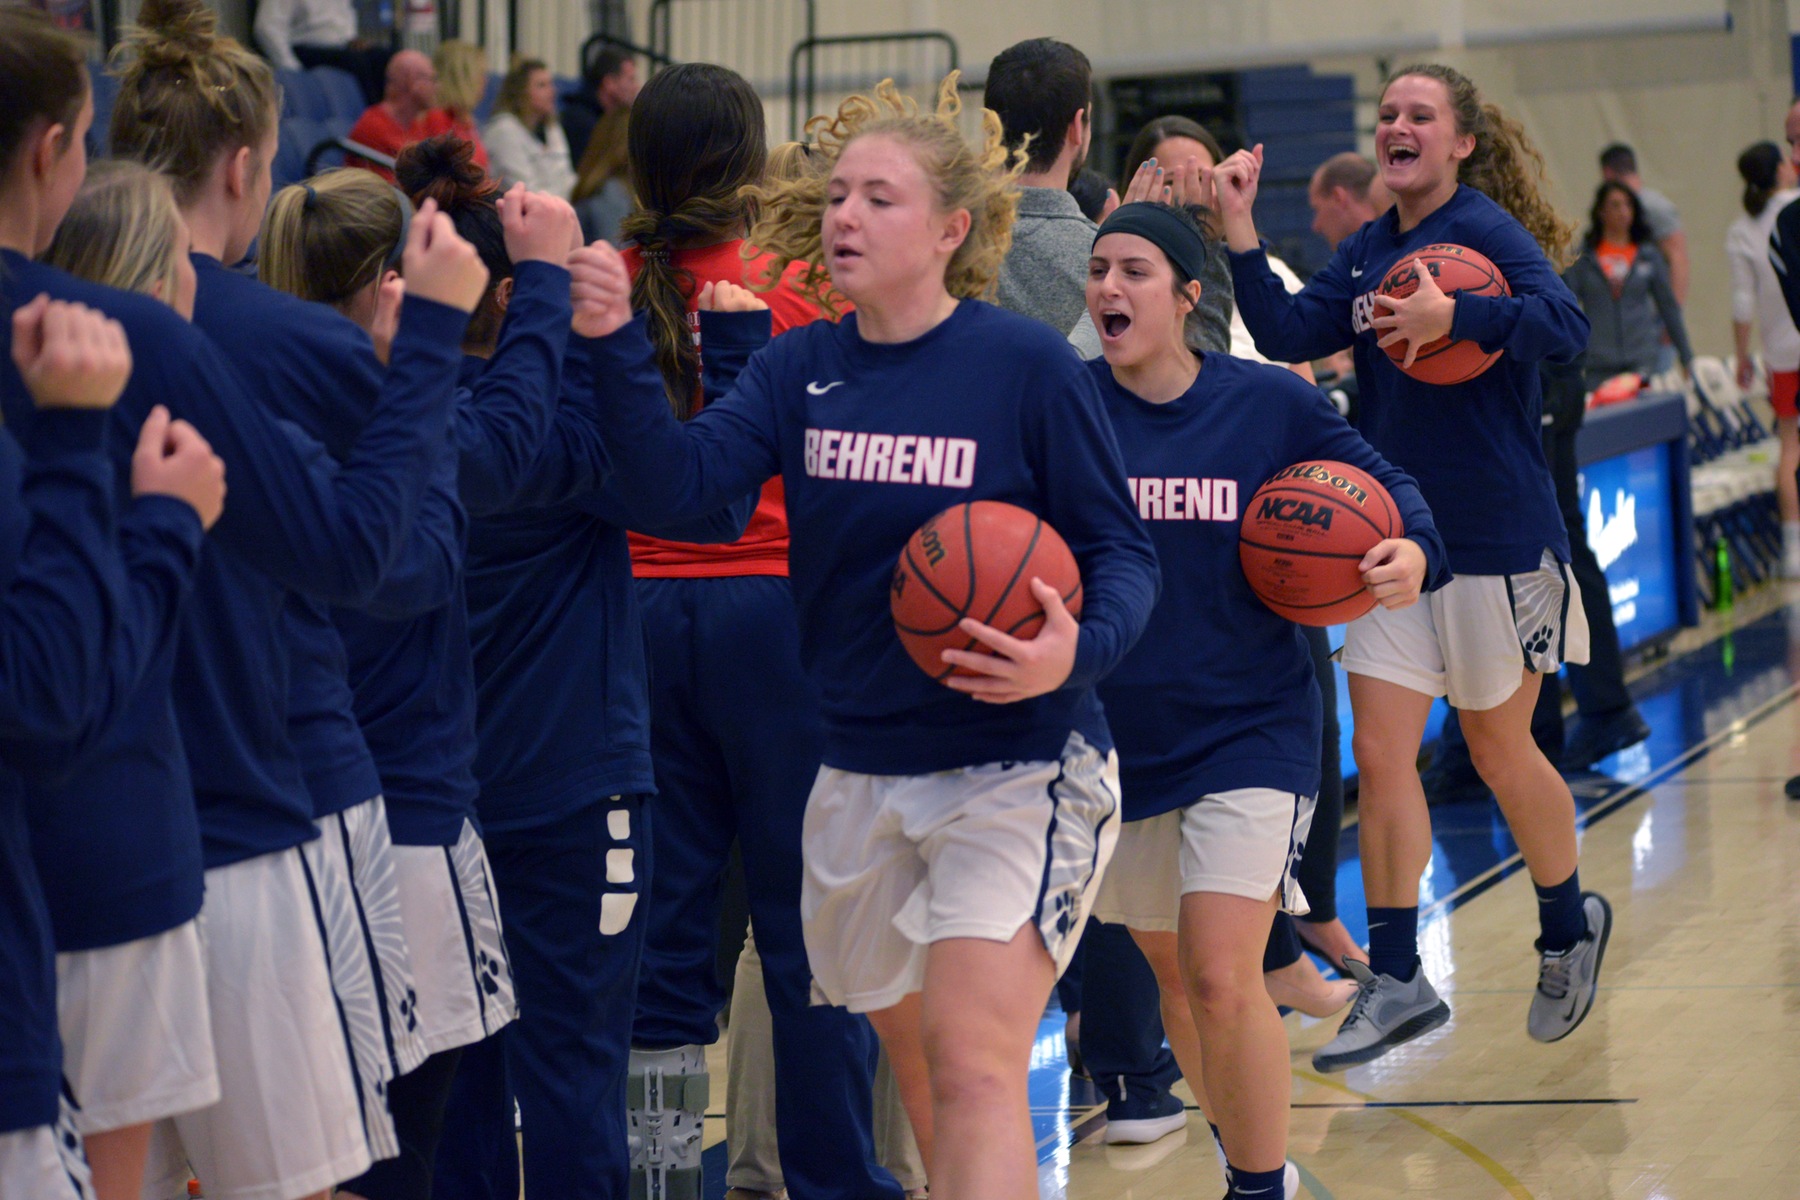 Behrend Takes on Pitt-Greenburg Saturday in AMCC Game of the Week